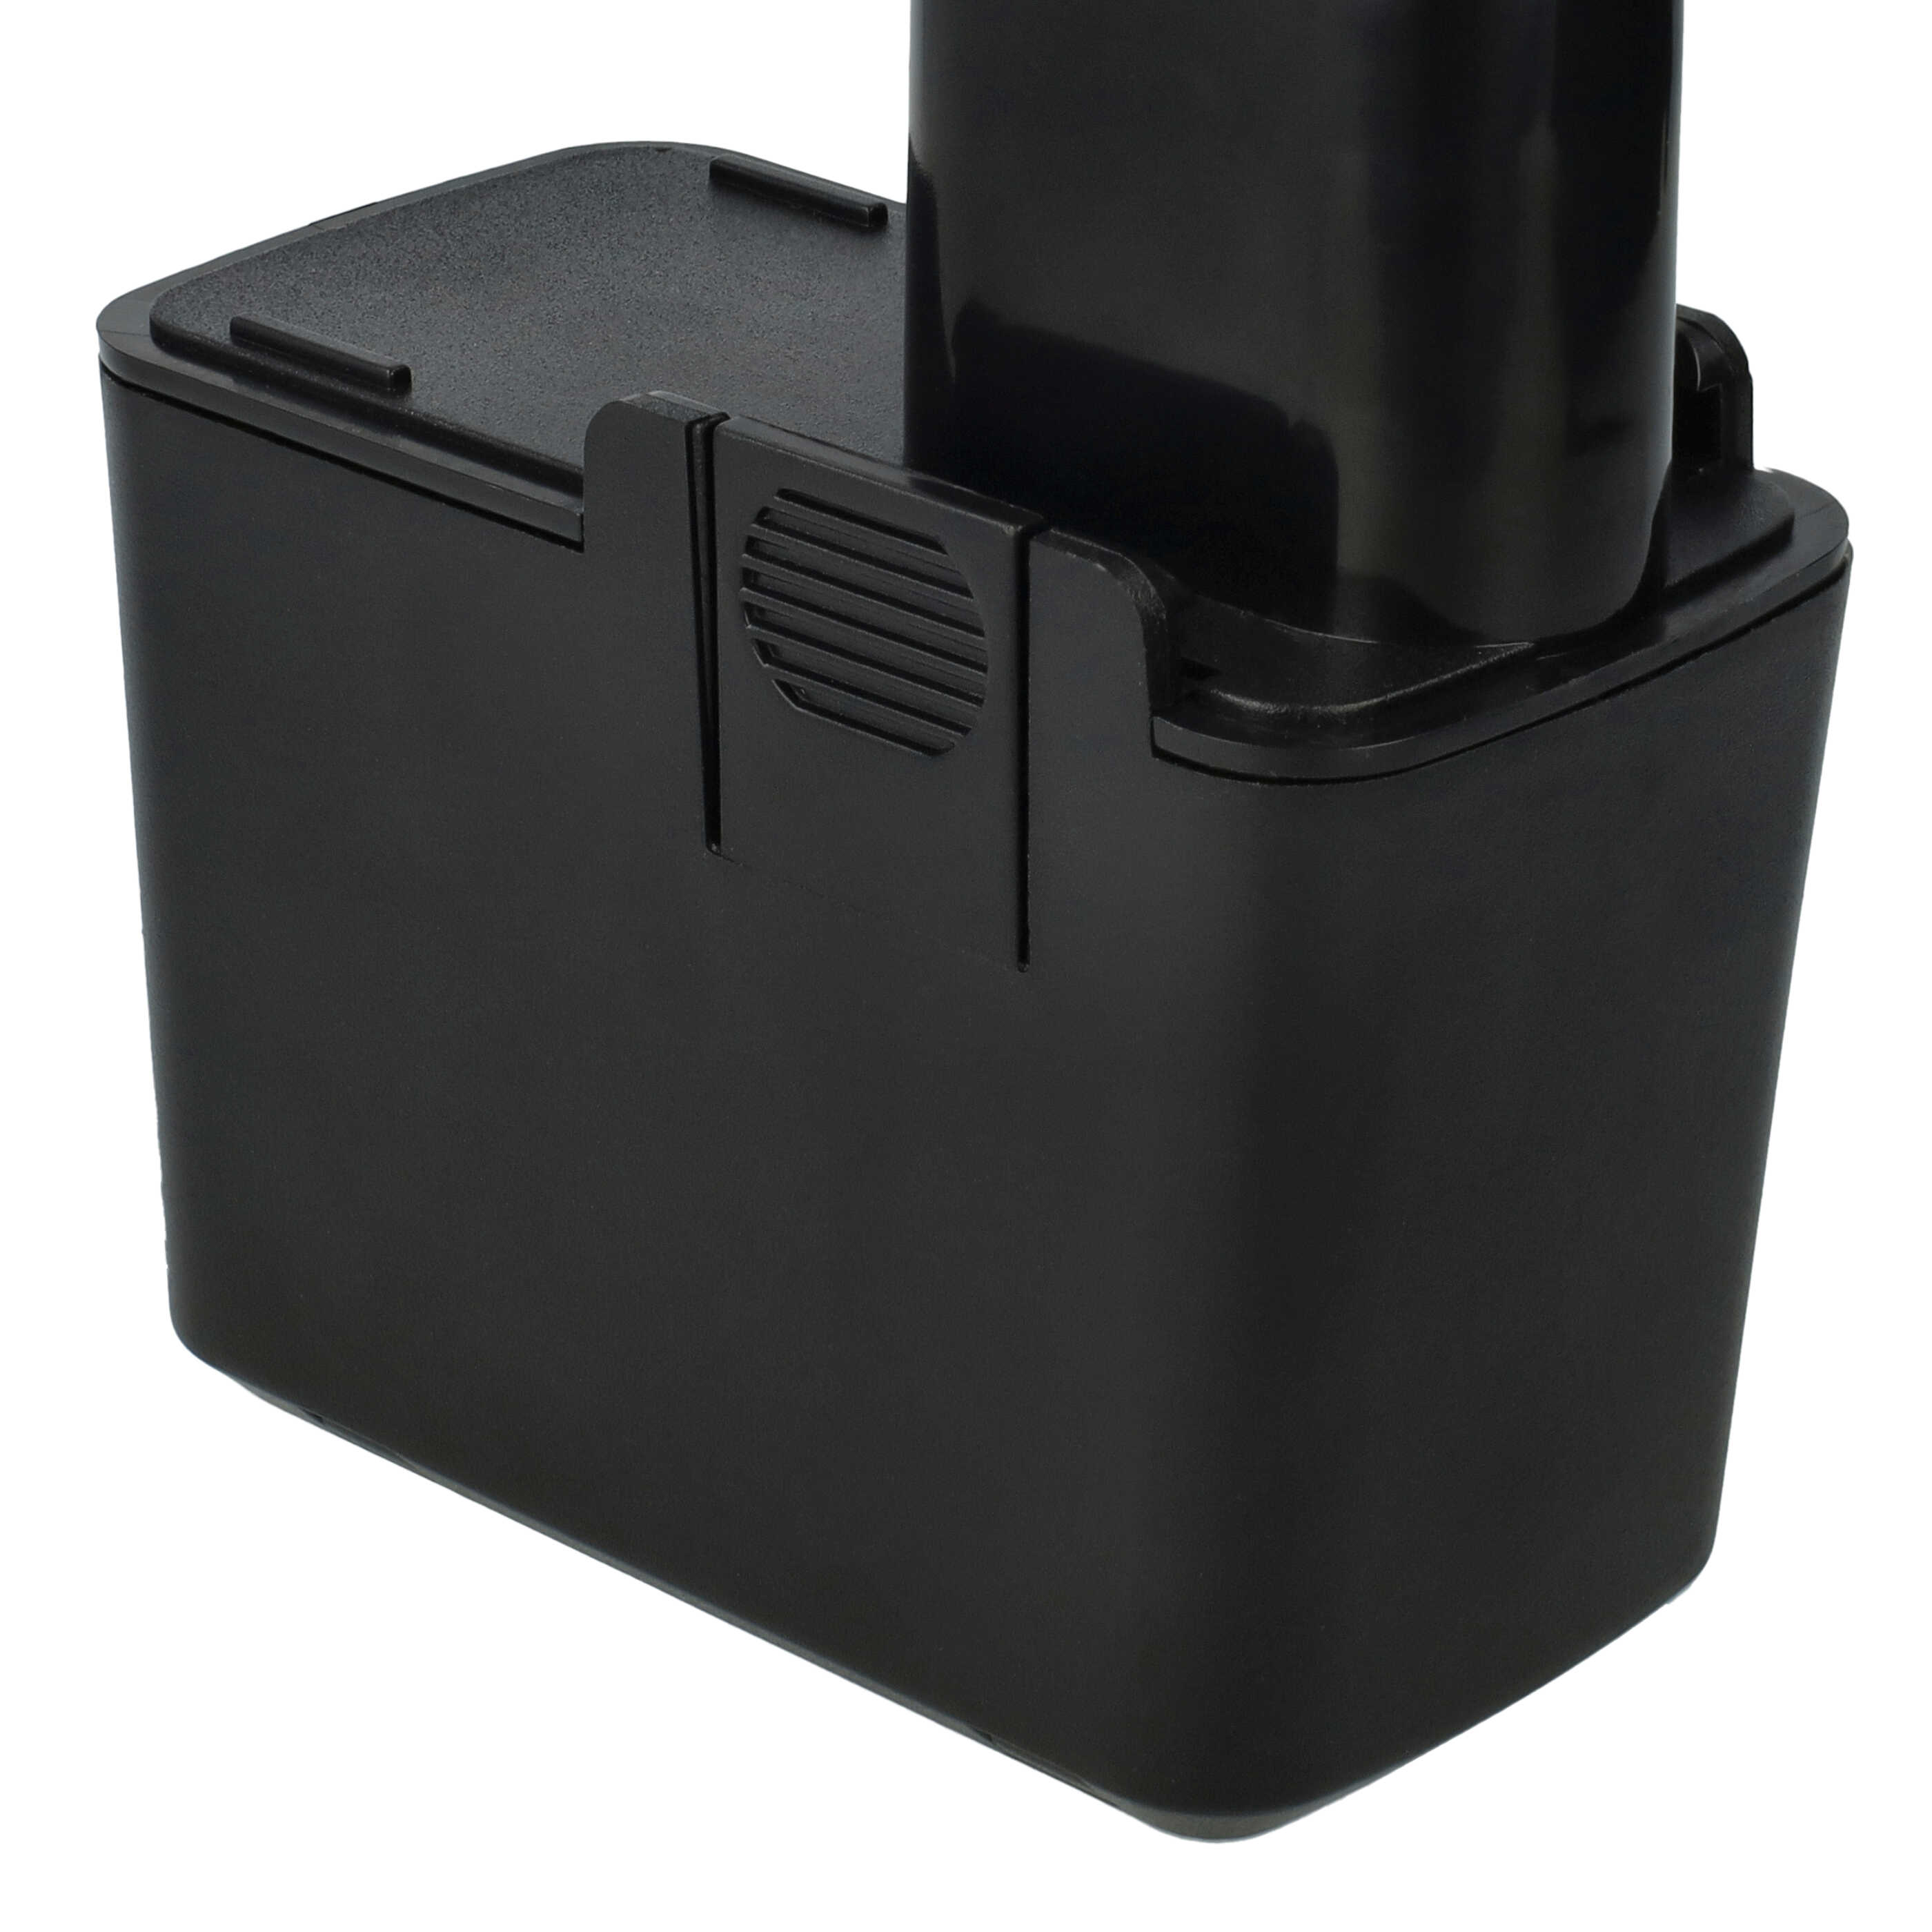 Electric Power Tool Battery Replaces Bosch 2 607 335 210, 2 607 335 160 - 2000 mAh, 14.4 V, NiMH